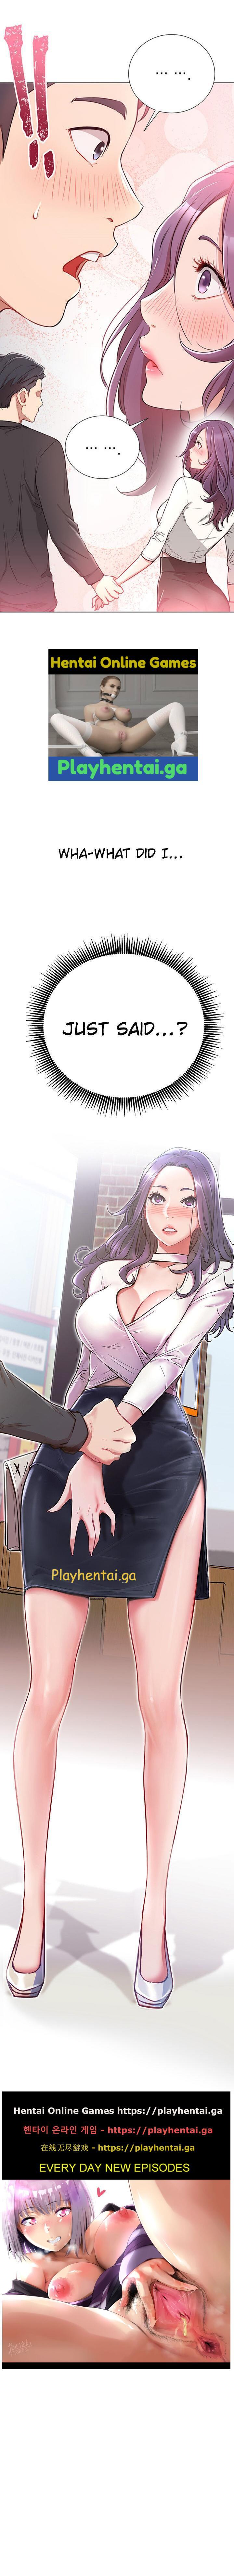 Nylons LIVE WITH : DO YOU WANT TO DO IT Ch. 7 Lez - Page 10